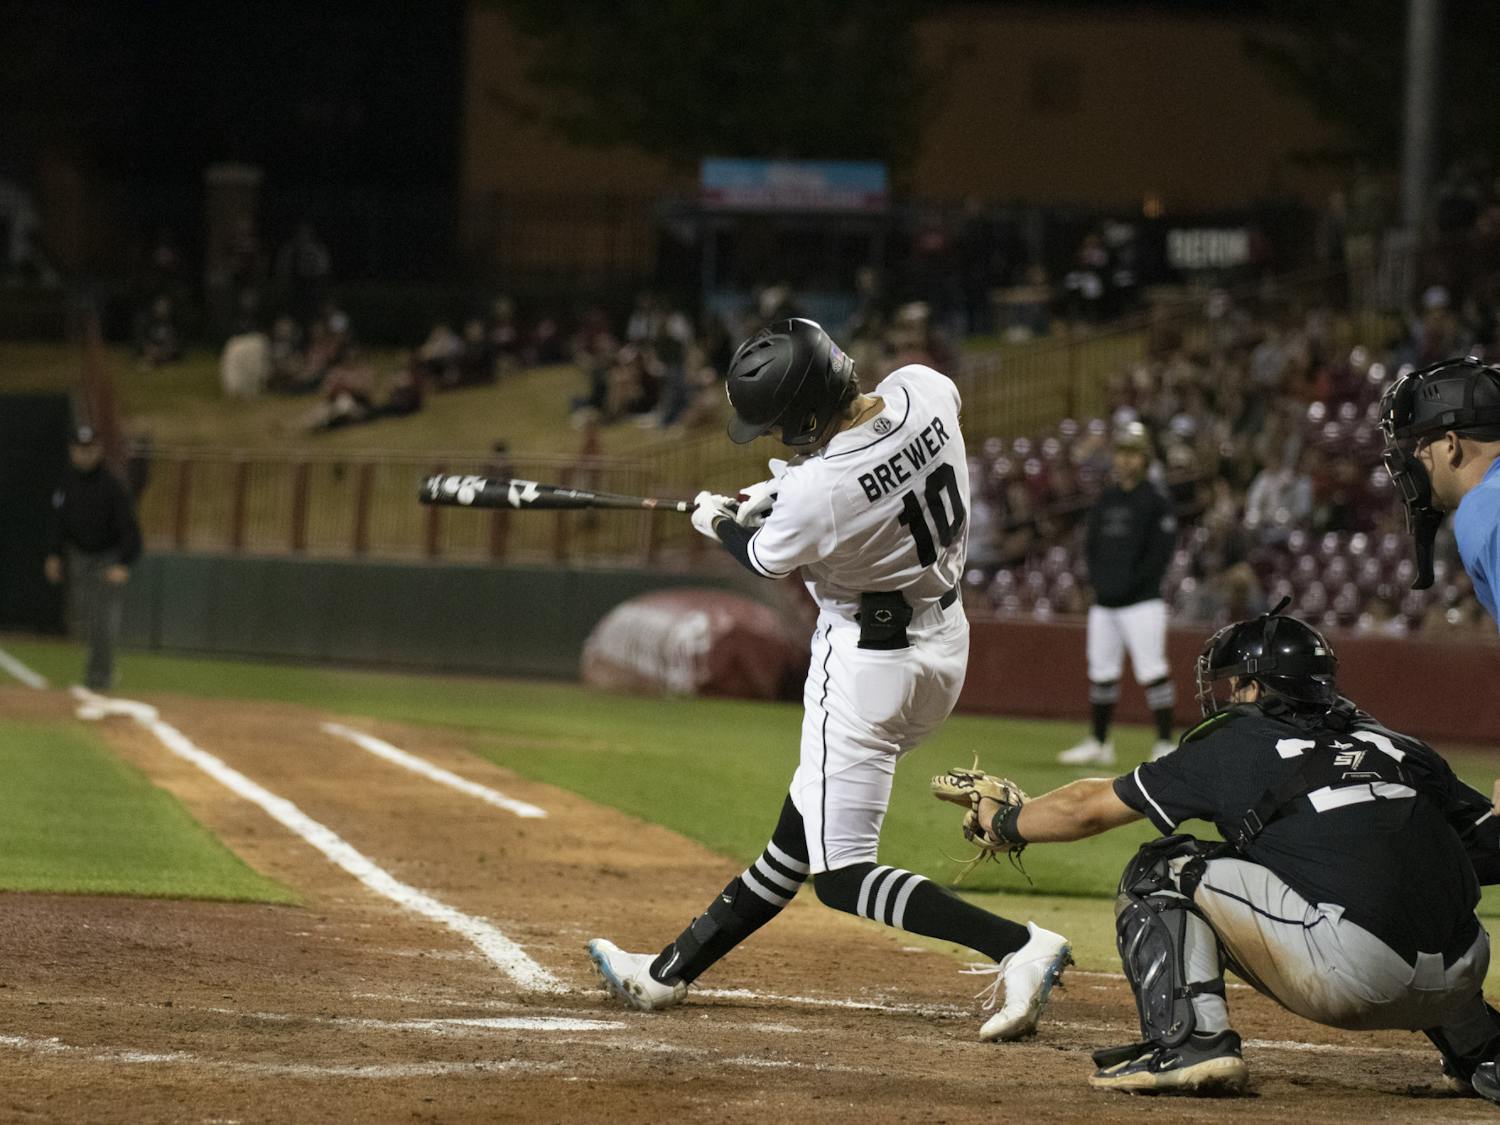 Senior outfielder Dylan Brewer battles at the plate to get on base and extend the South Carolina lead over USC Upstate. With home runs from Brewer and freshman outfielder Ethan Petry, the Gamecocks won Tuesday night’s game against the Spartans 7-2.